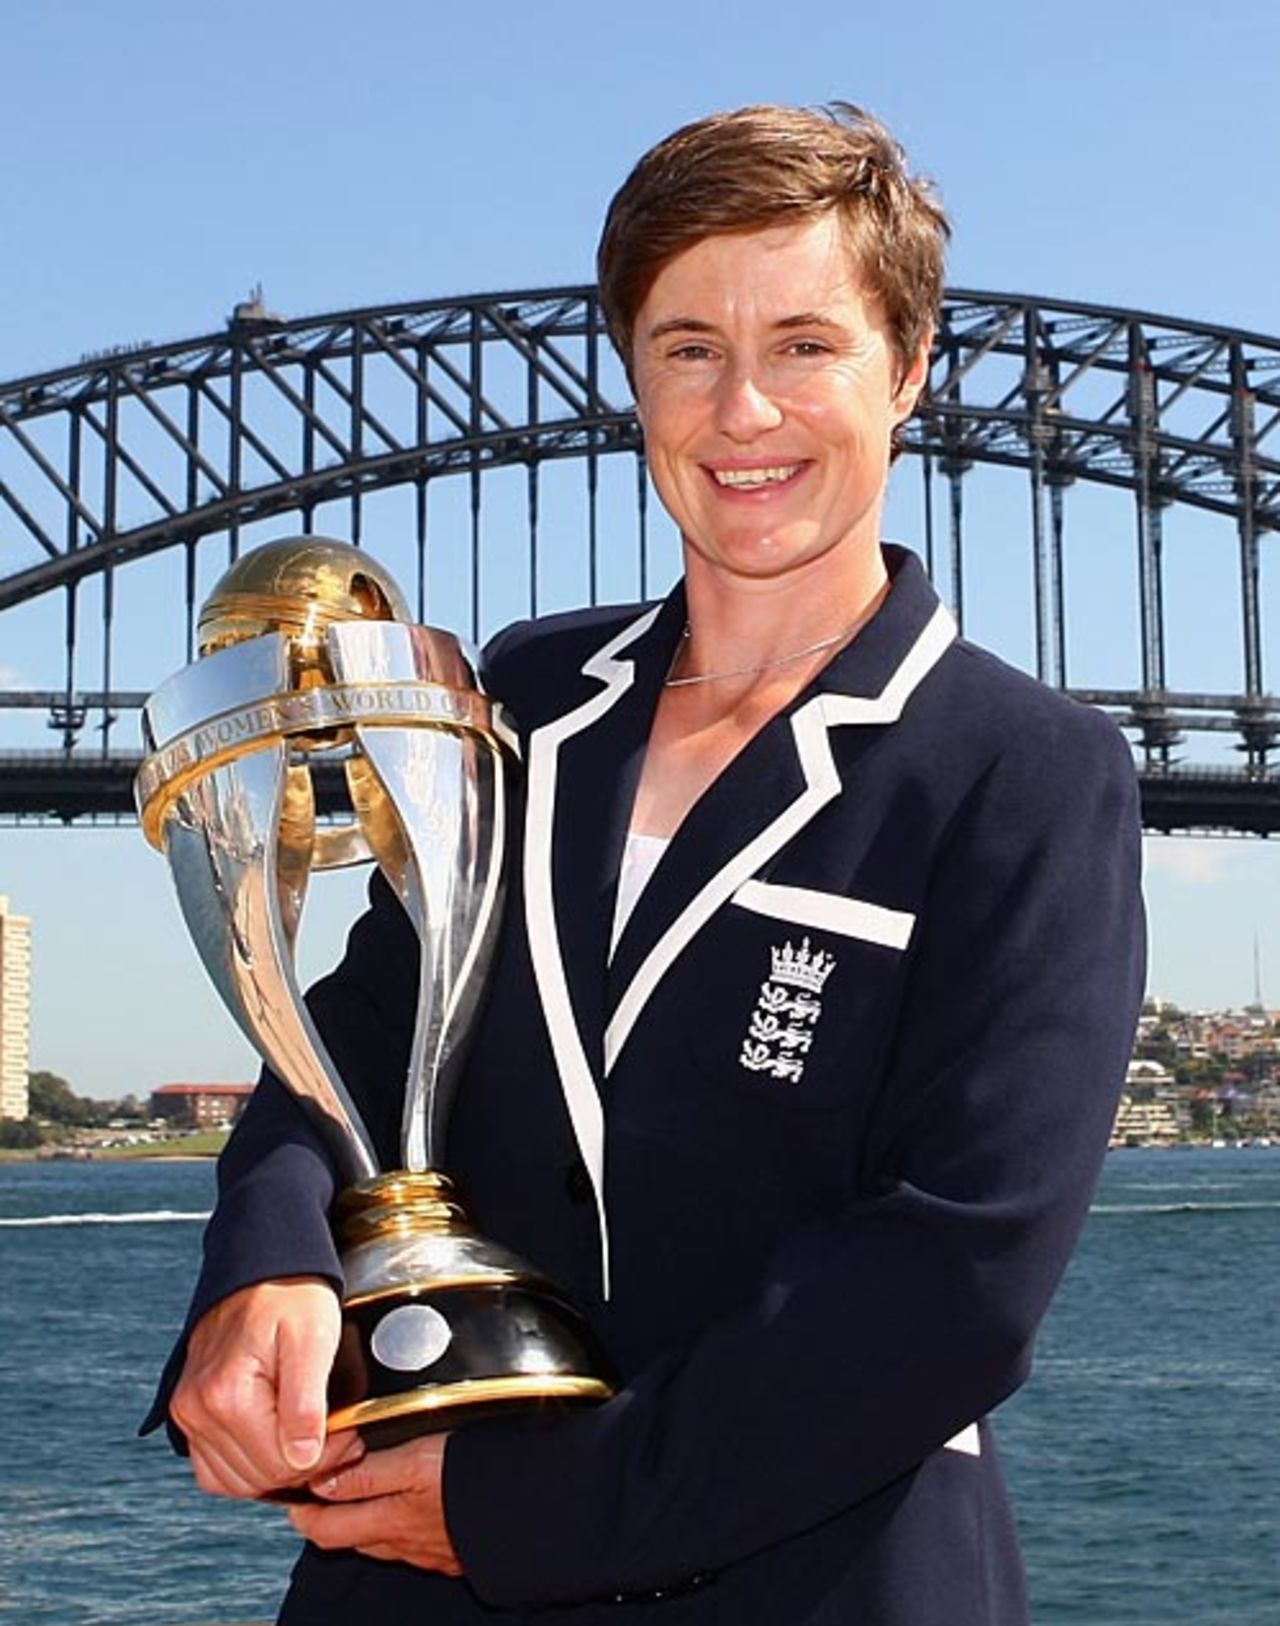 Claire Taylor with the world cup, women's World up, Sydney, March 23, 2009